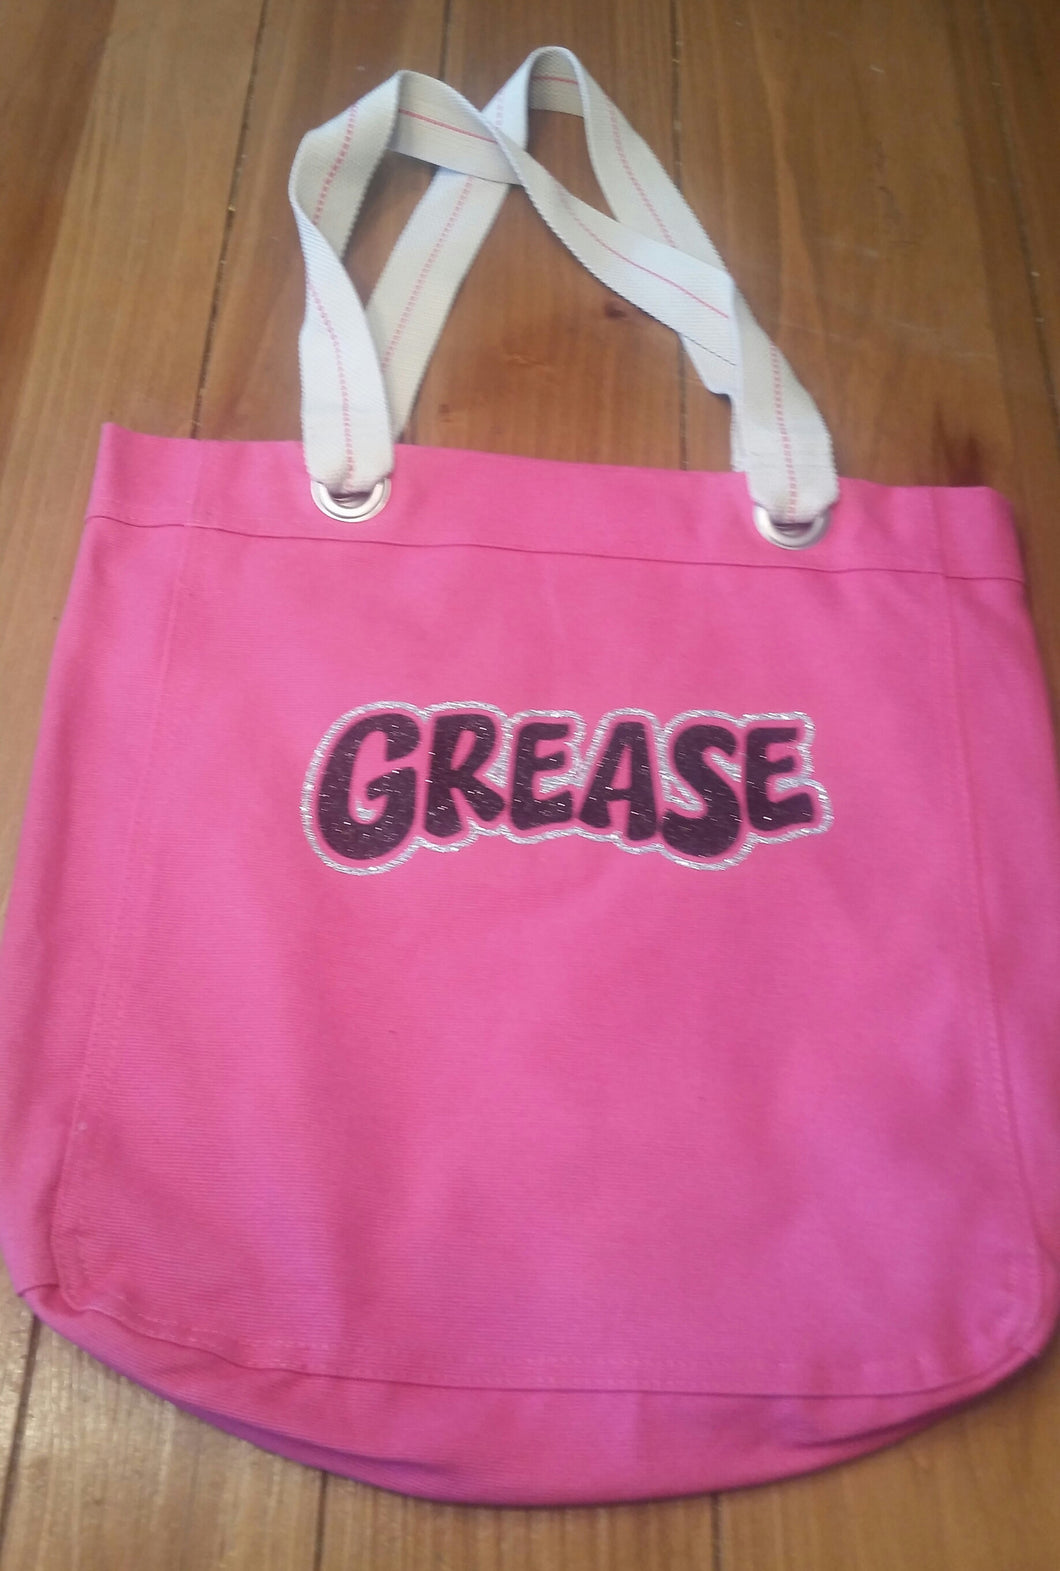 Grease Tote